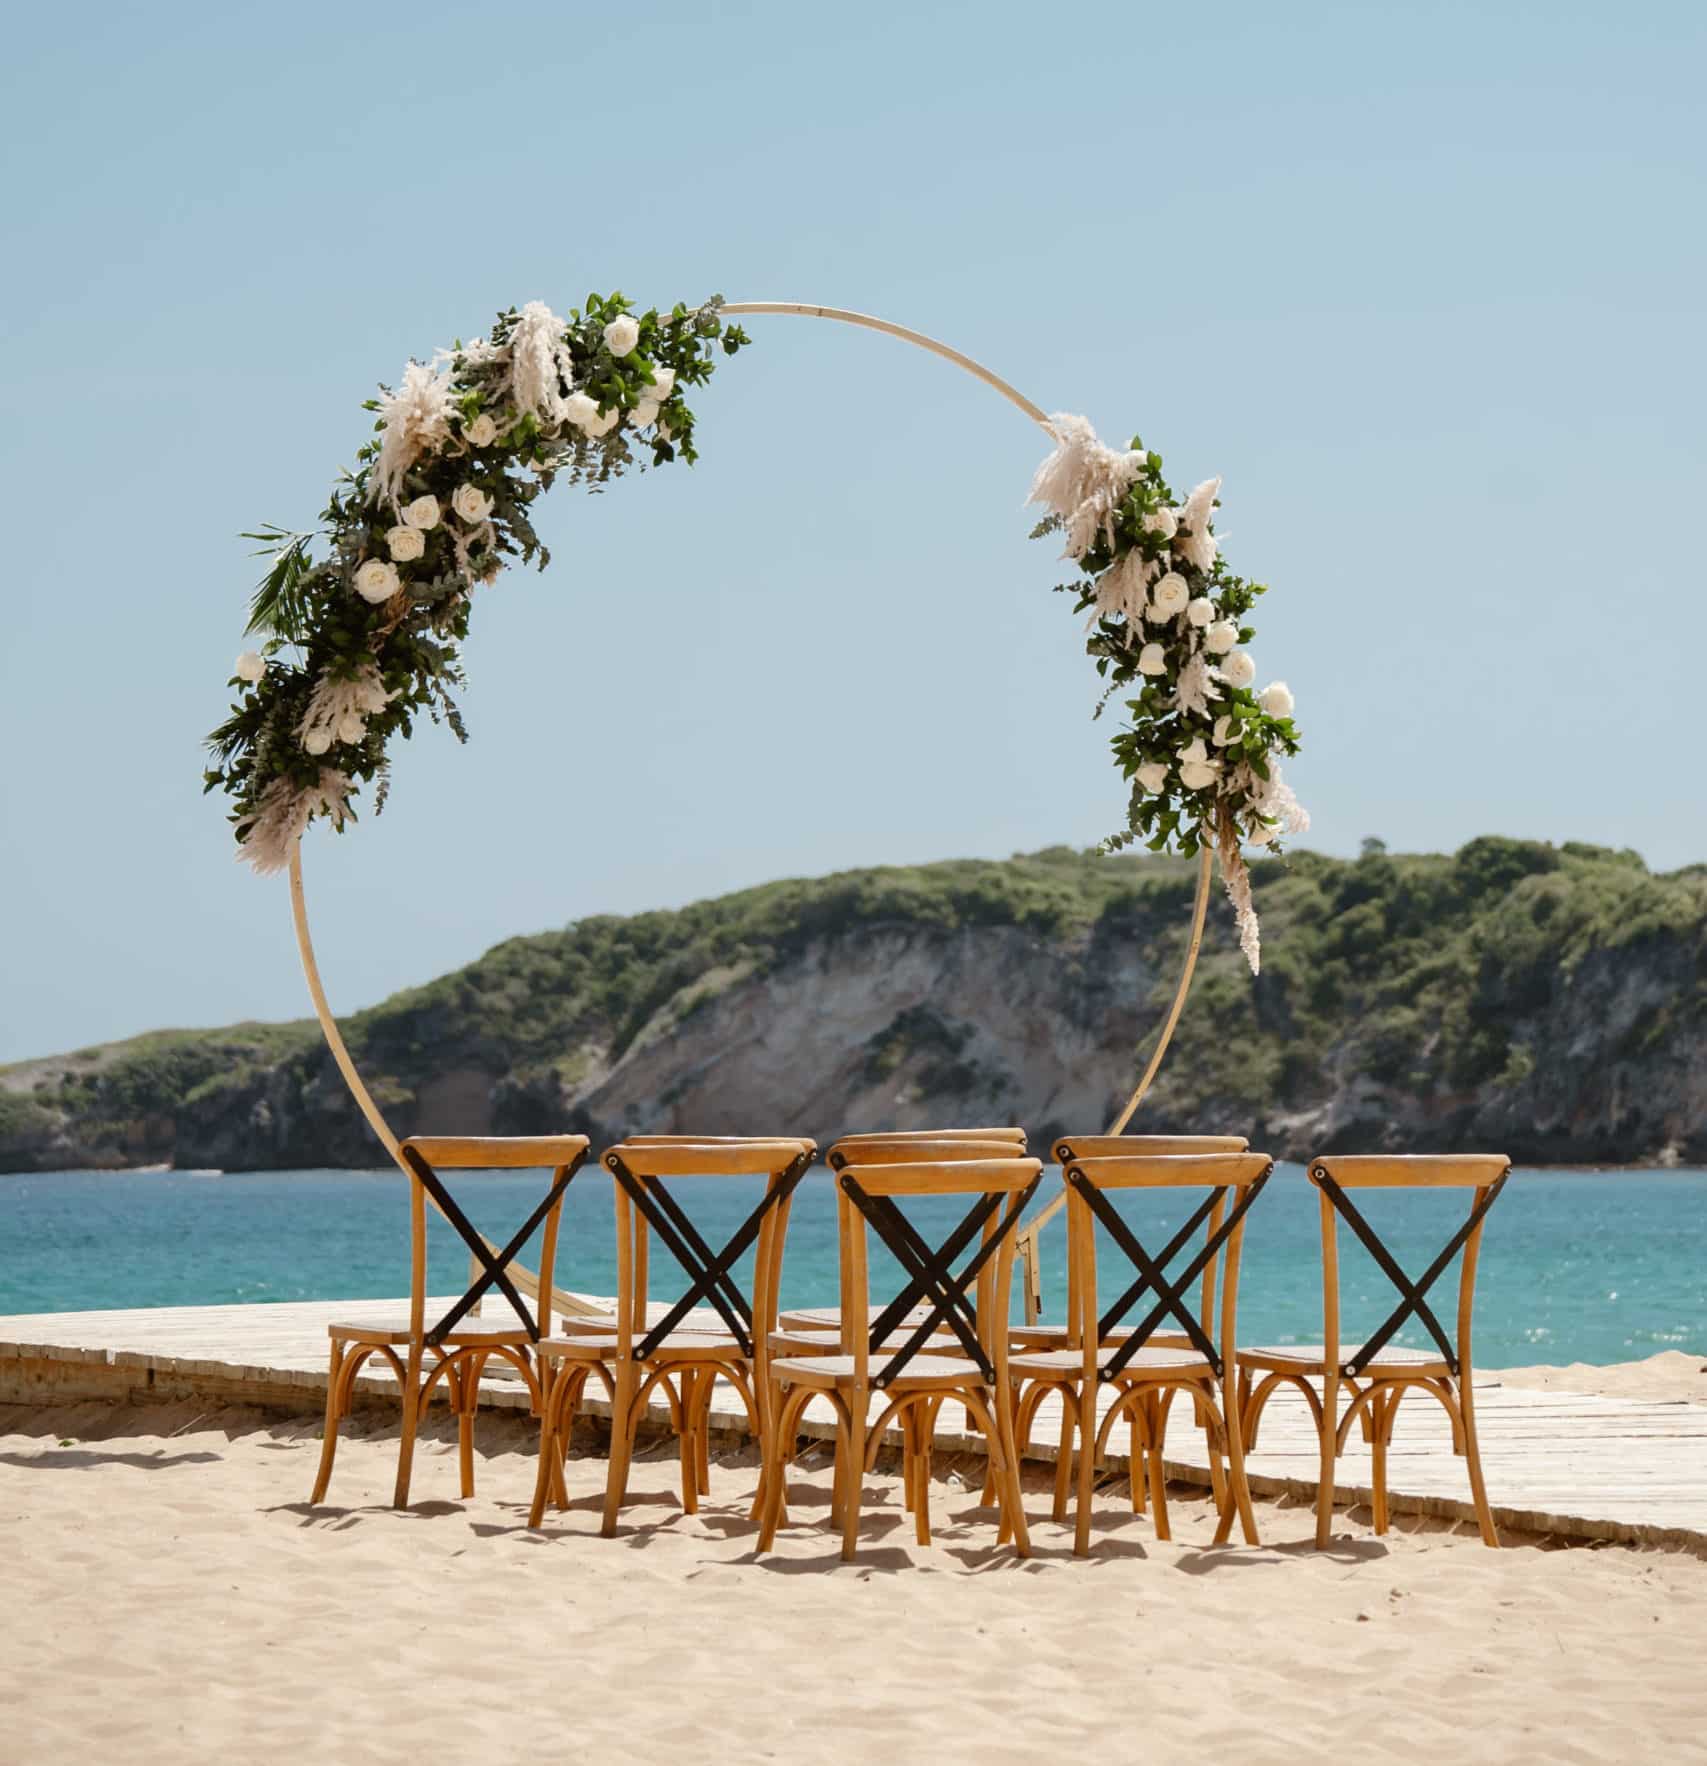 Destination Wedding Ceremony Setup on the beach in the Dominican Republic